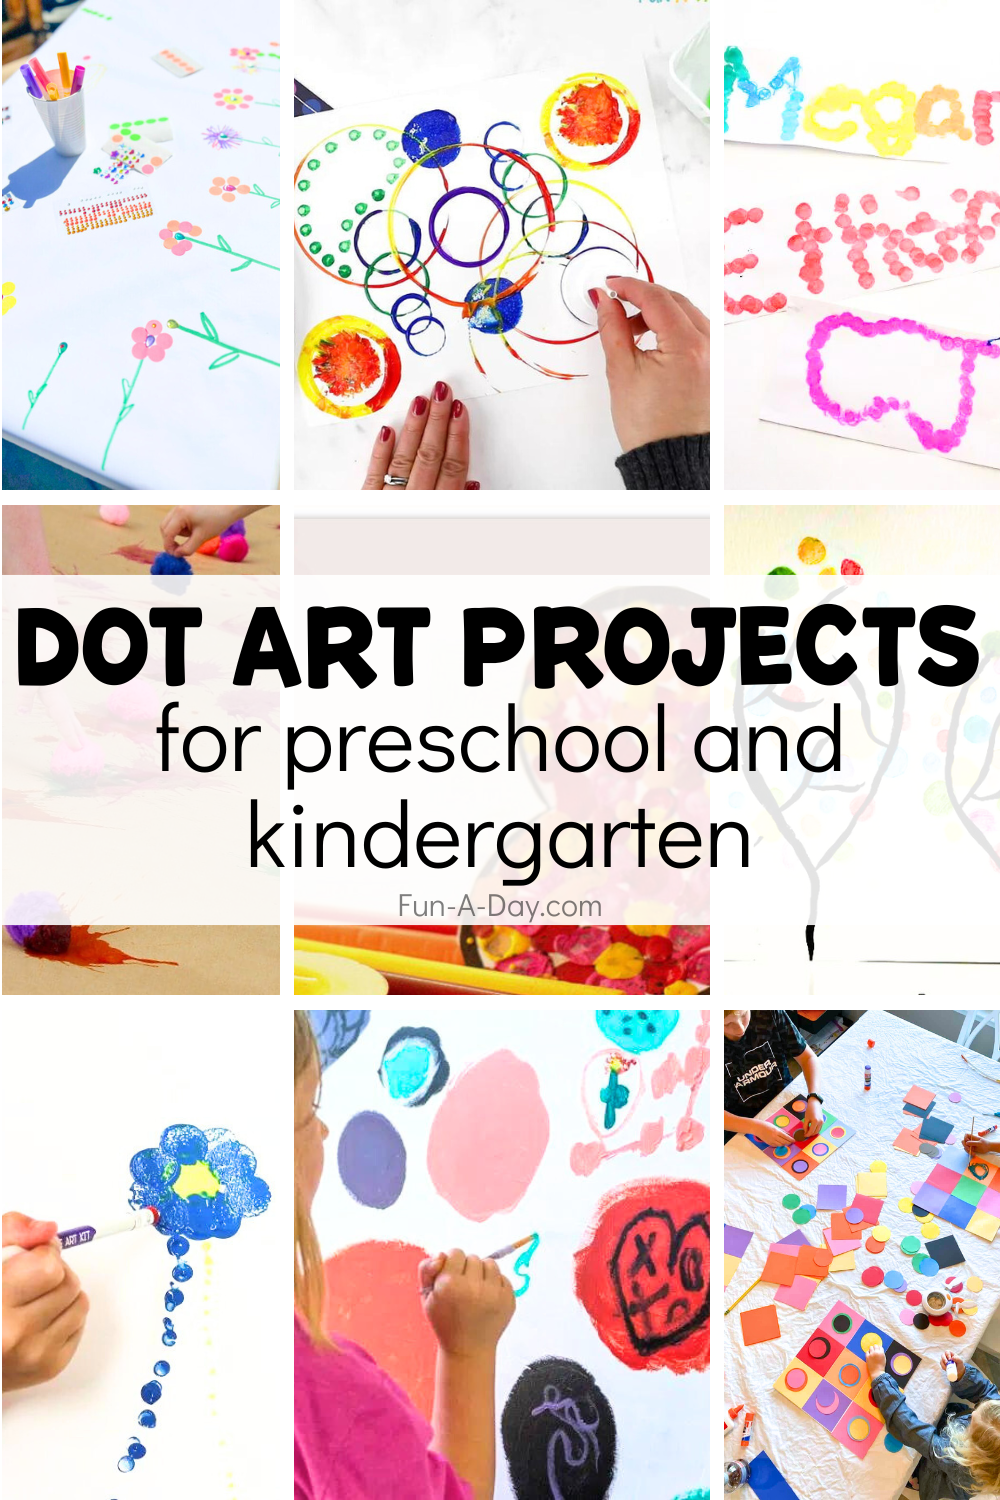 9 dot art project ideas with text that reads dot art projects for preschool and kindergarten.